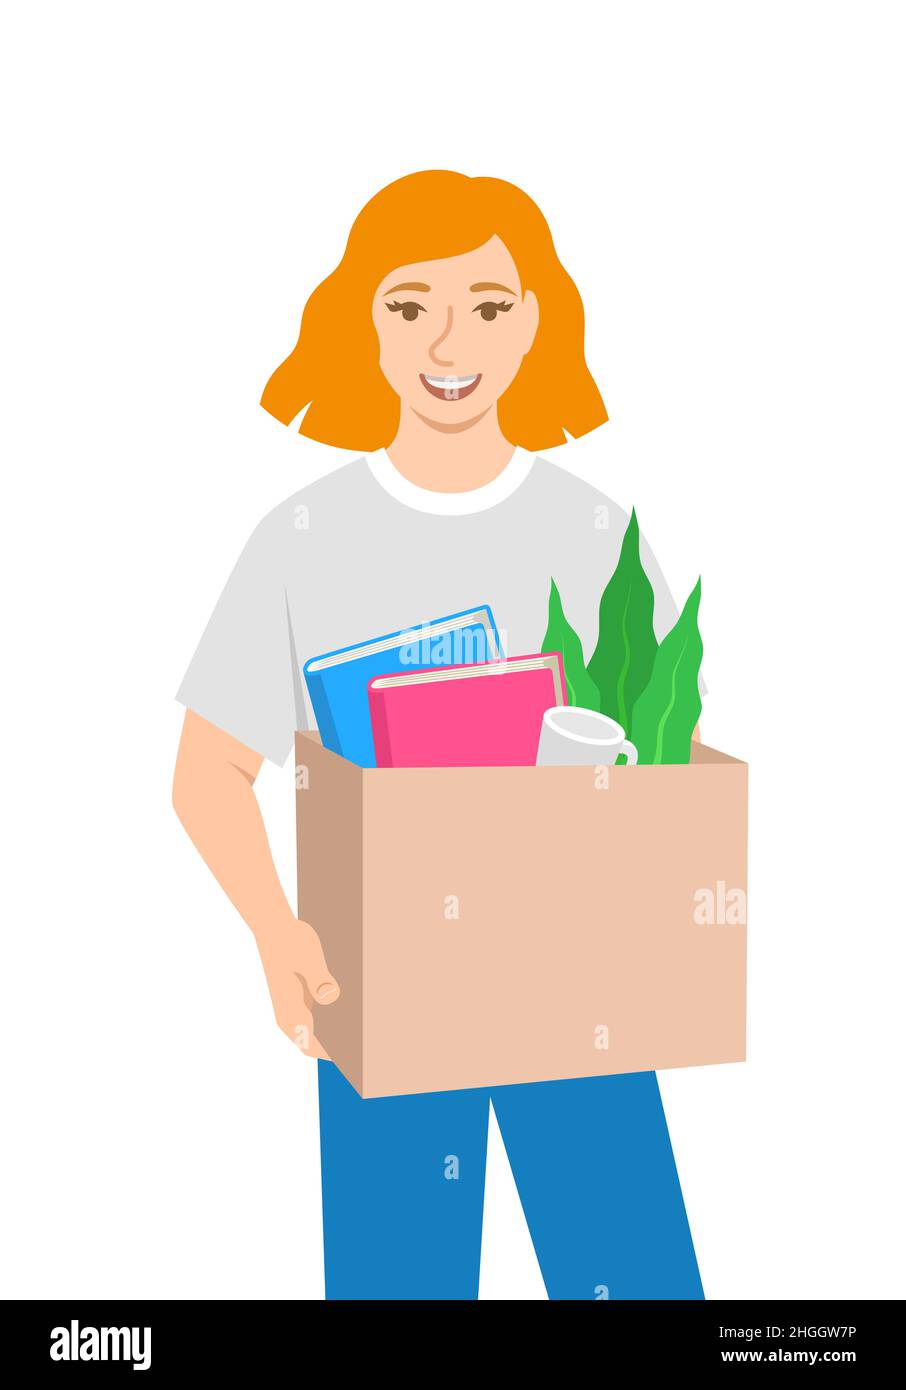 New worker joins a team. New job opportunity concept. Young girl got a job for her career development. Happy employee got a promotion. Flat vector ill Stock Vector